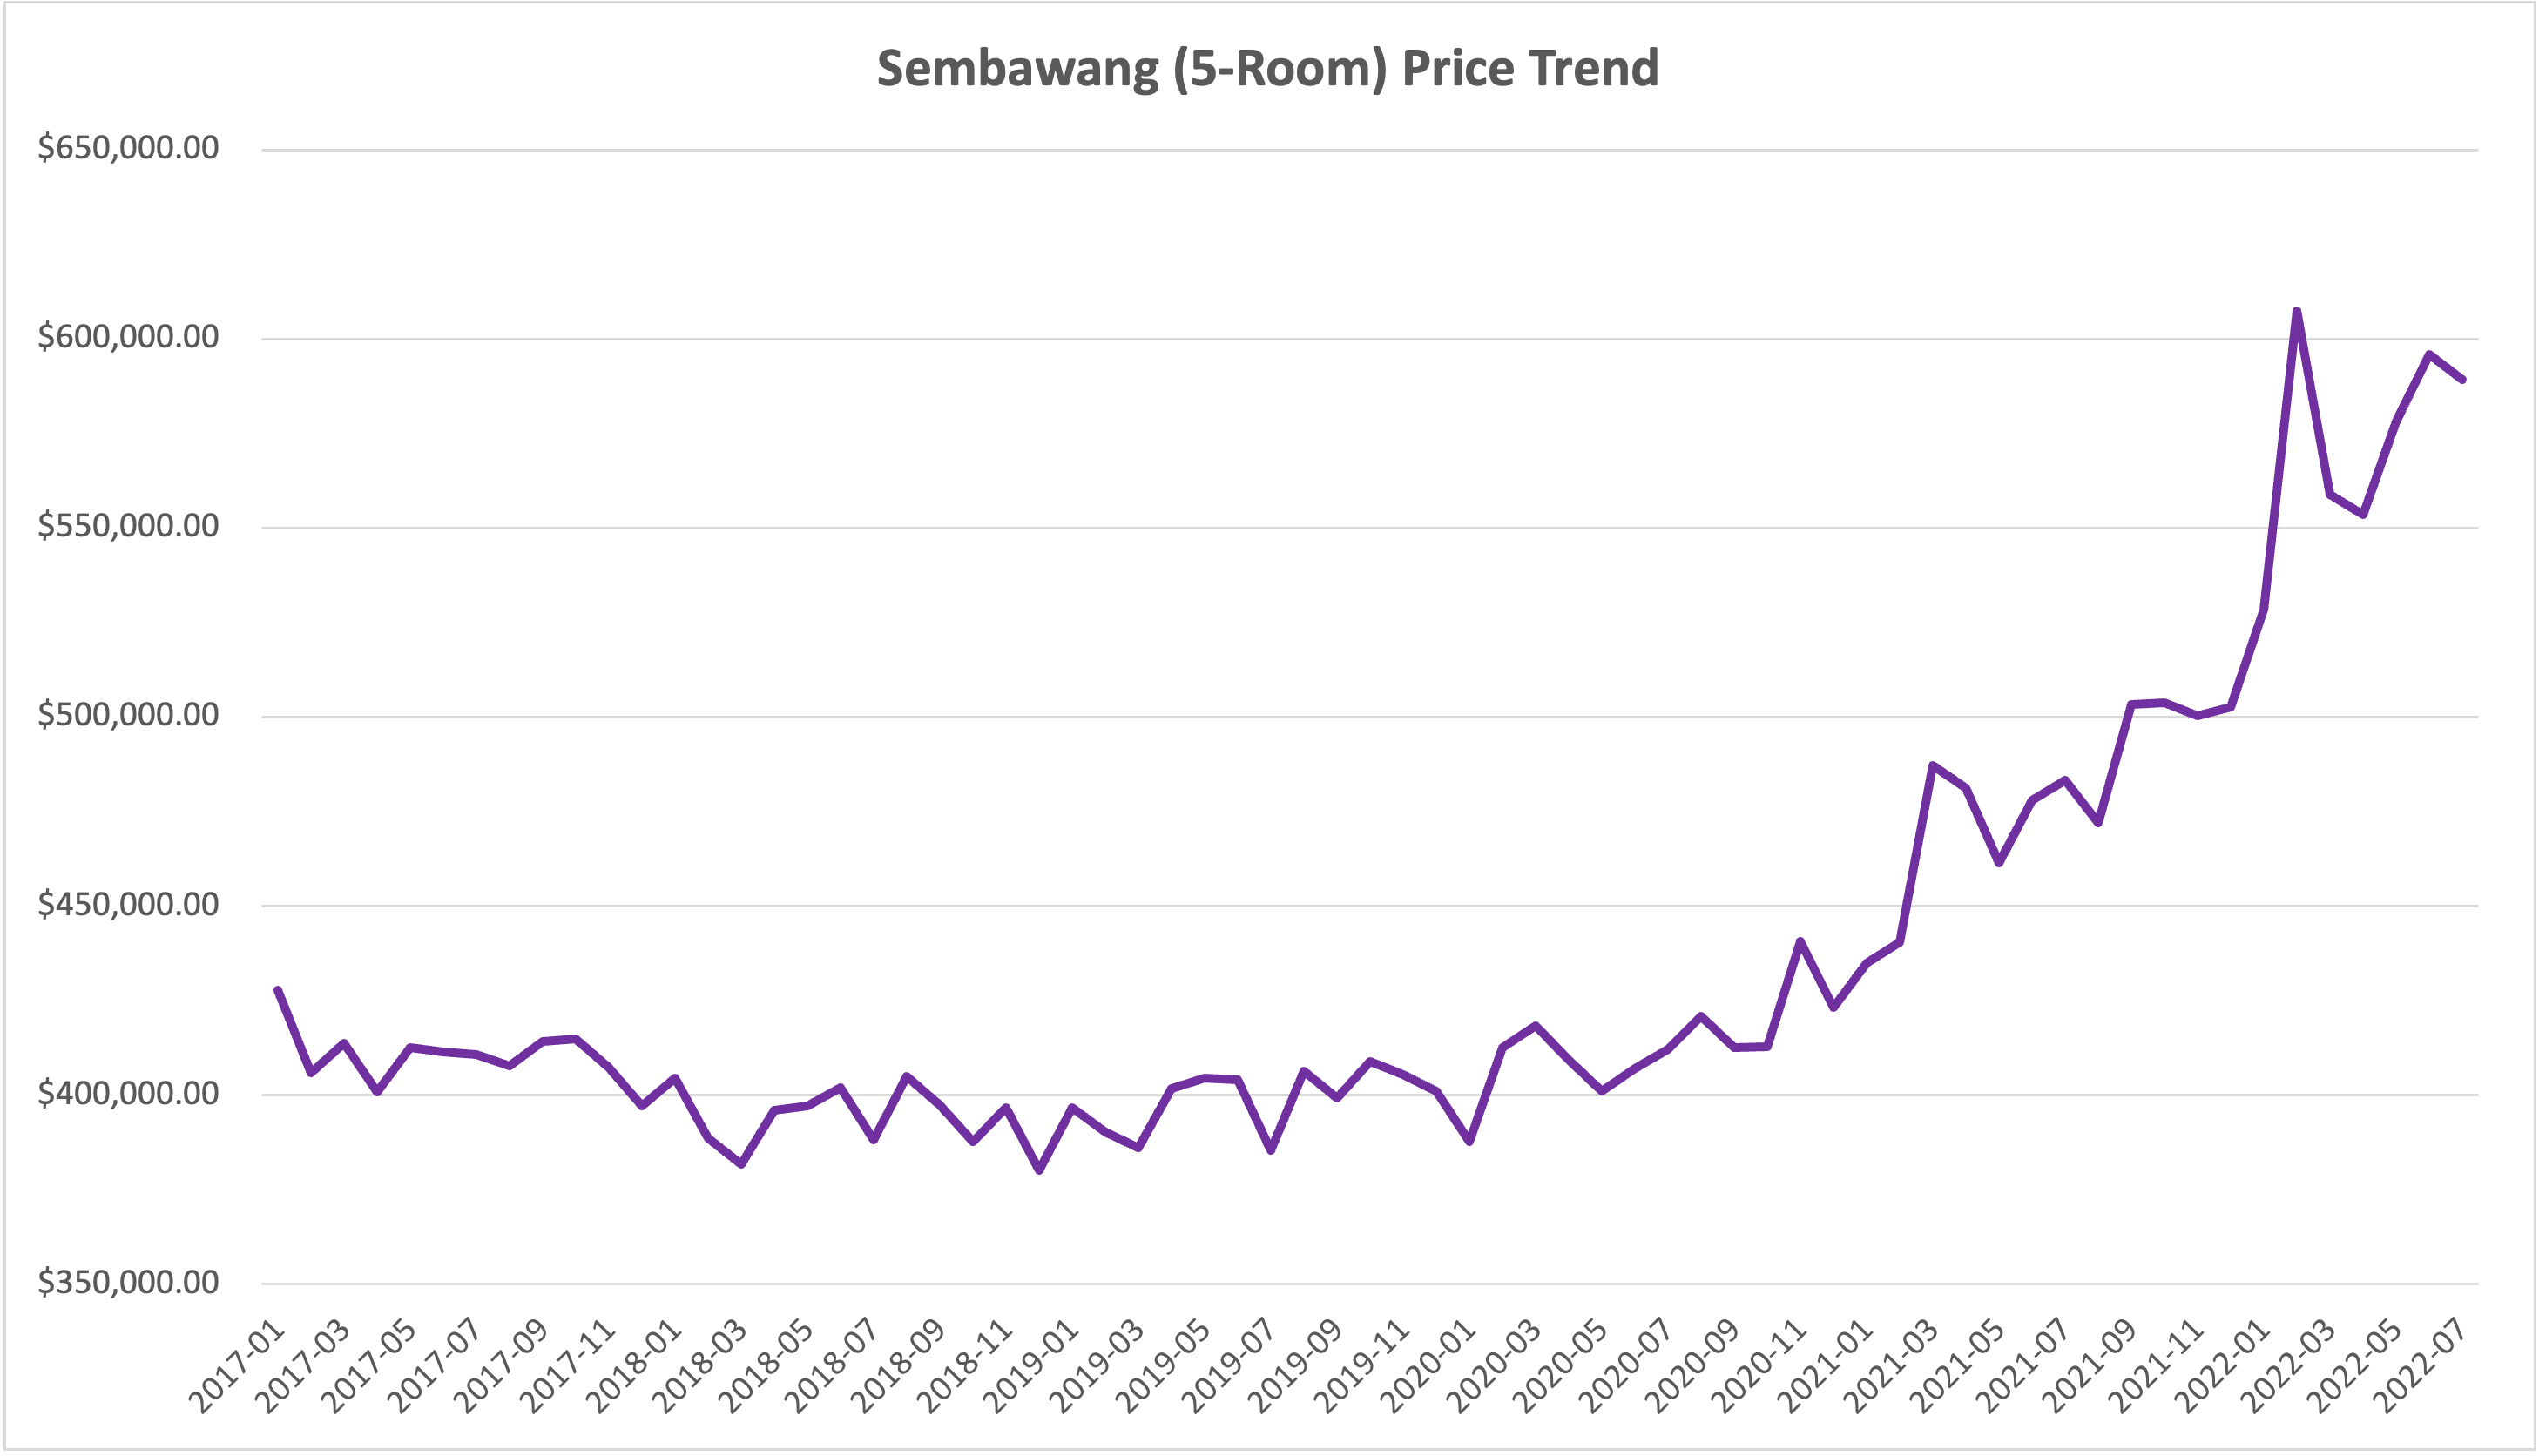 Sembawang 5-room price trend from 2018 to 2022